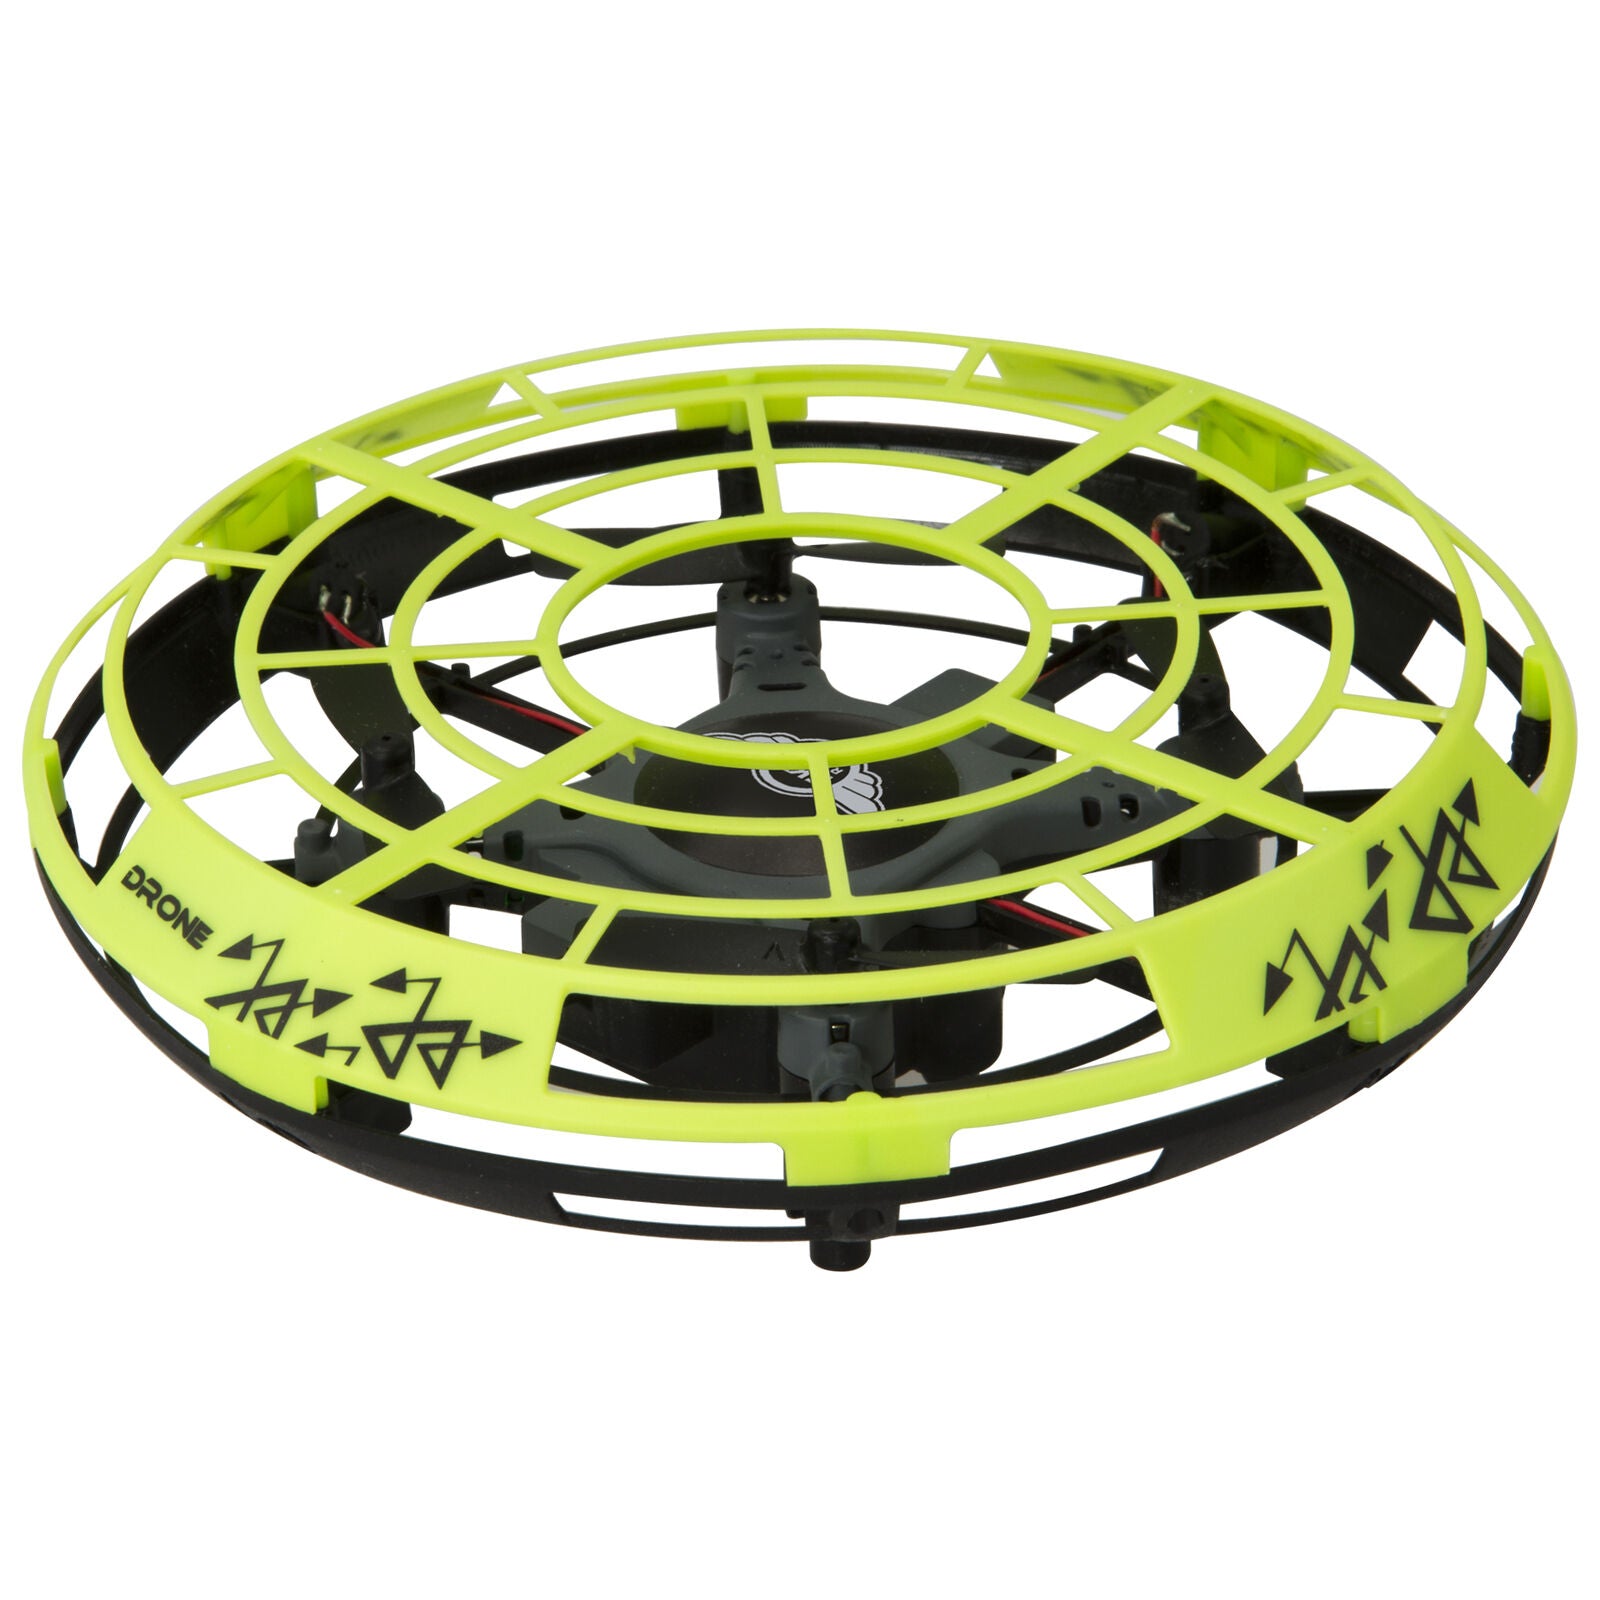 Sky Rider Satellite Obstacle Avoidance Drone, Green (DR159)